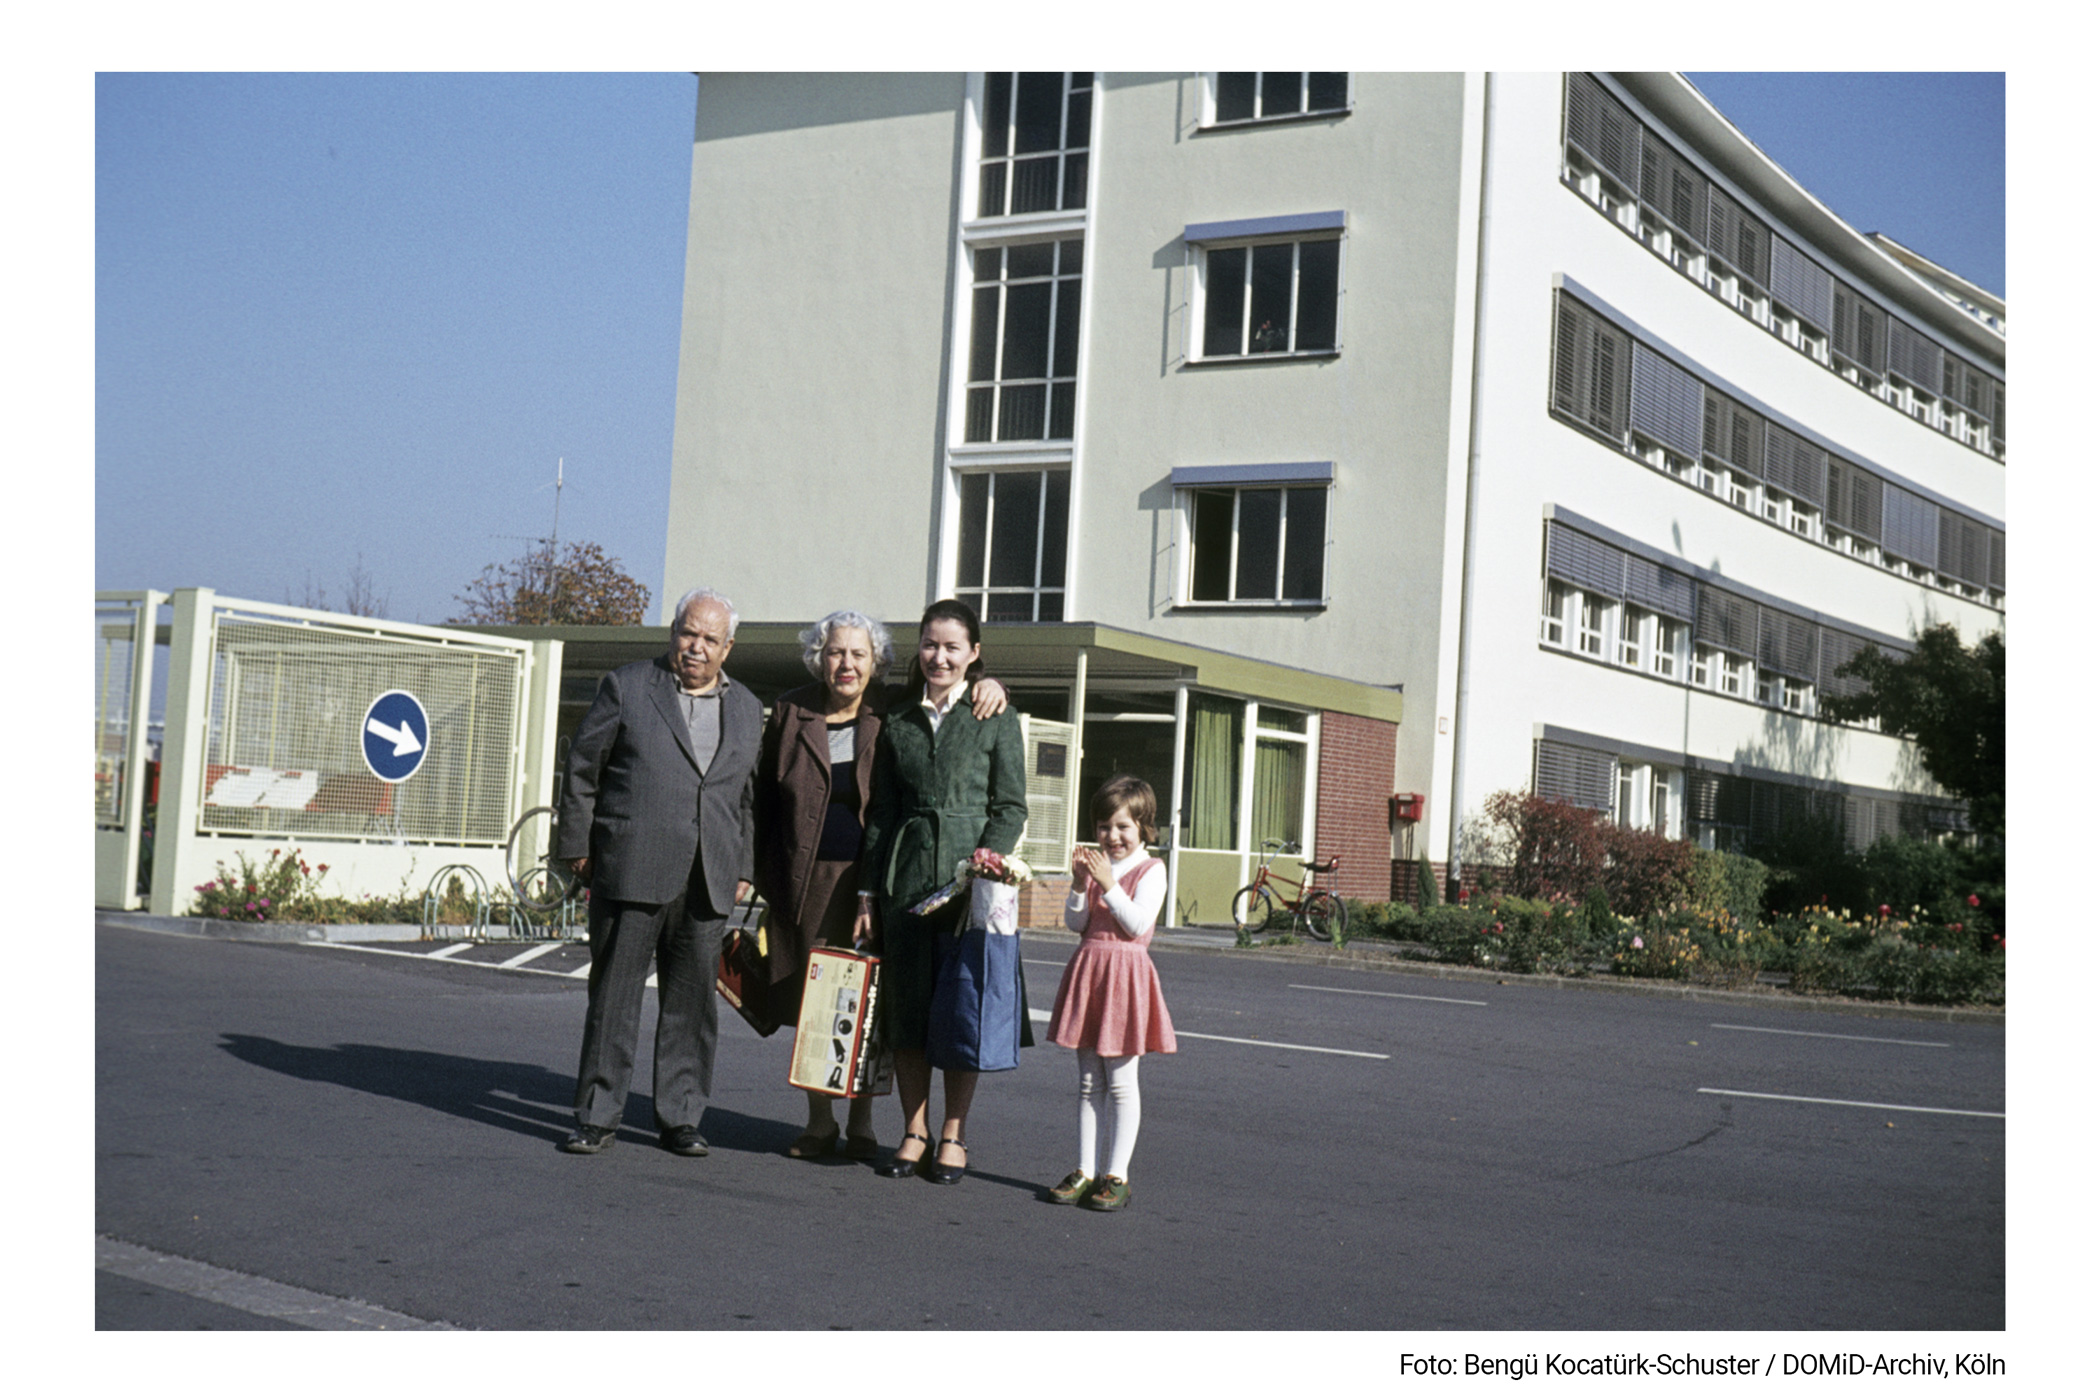 A family picks up the girl's mother after her workday at Philips in Krefeld Linn. The grandparents, with whom the granddaughter lived for many years, had arrived from Turkey shortly before. This picture illustrates the fate of the "suitcase children" who commuted between Germany and Turkey because of their parents' jobs.